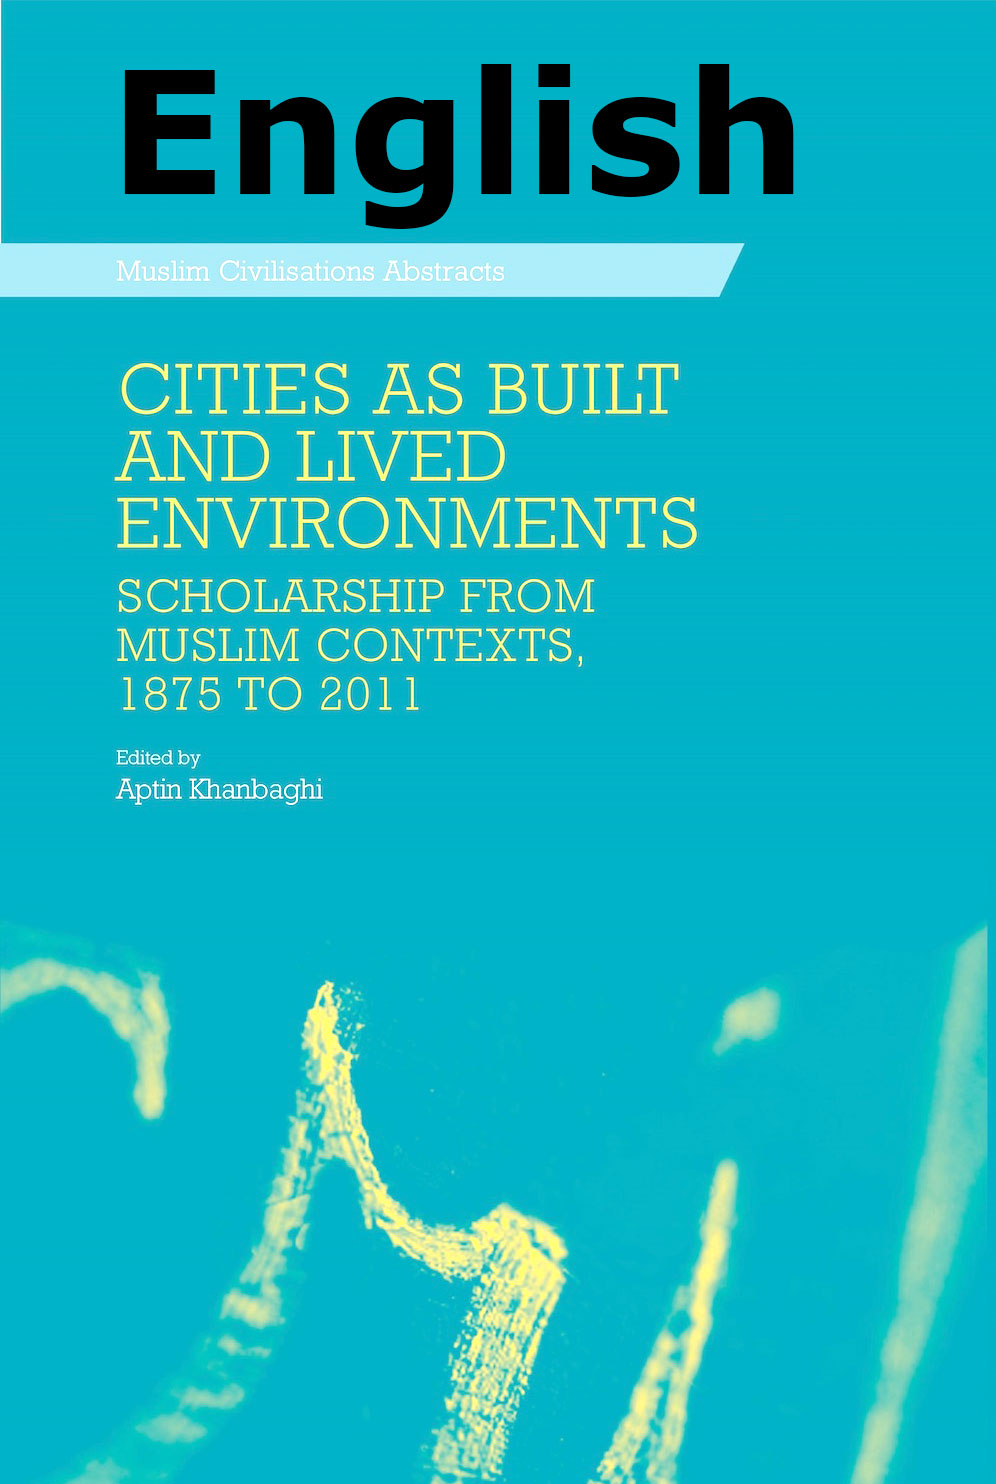 Cities as Built and Lived Environments: Scholarship from Muslim Contexts, 1875-2011 (English)